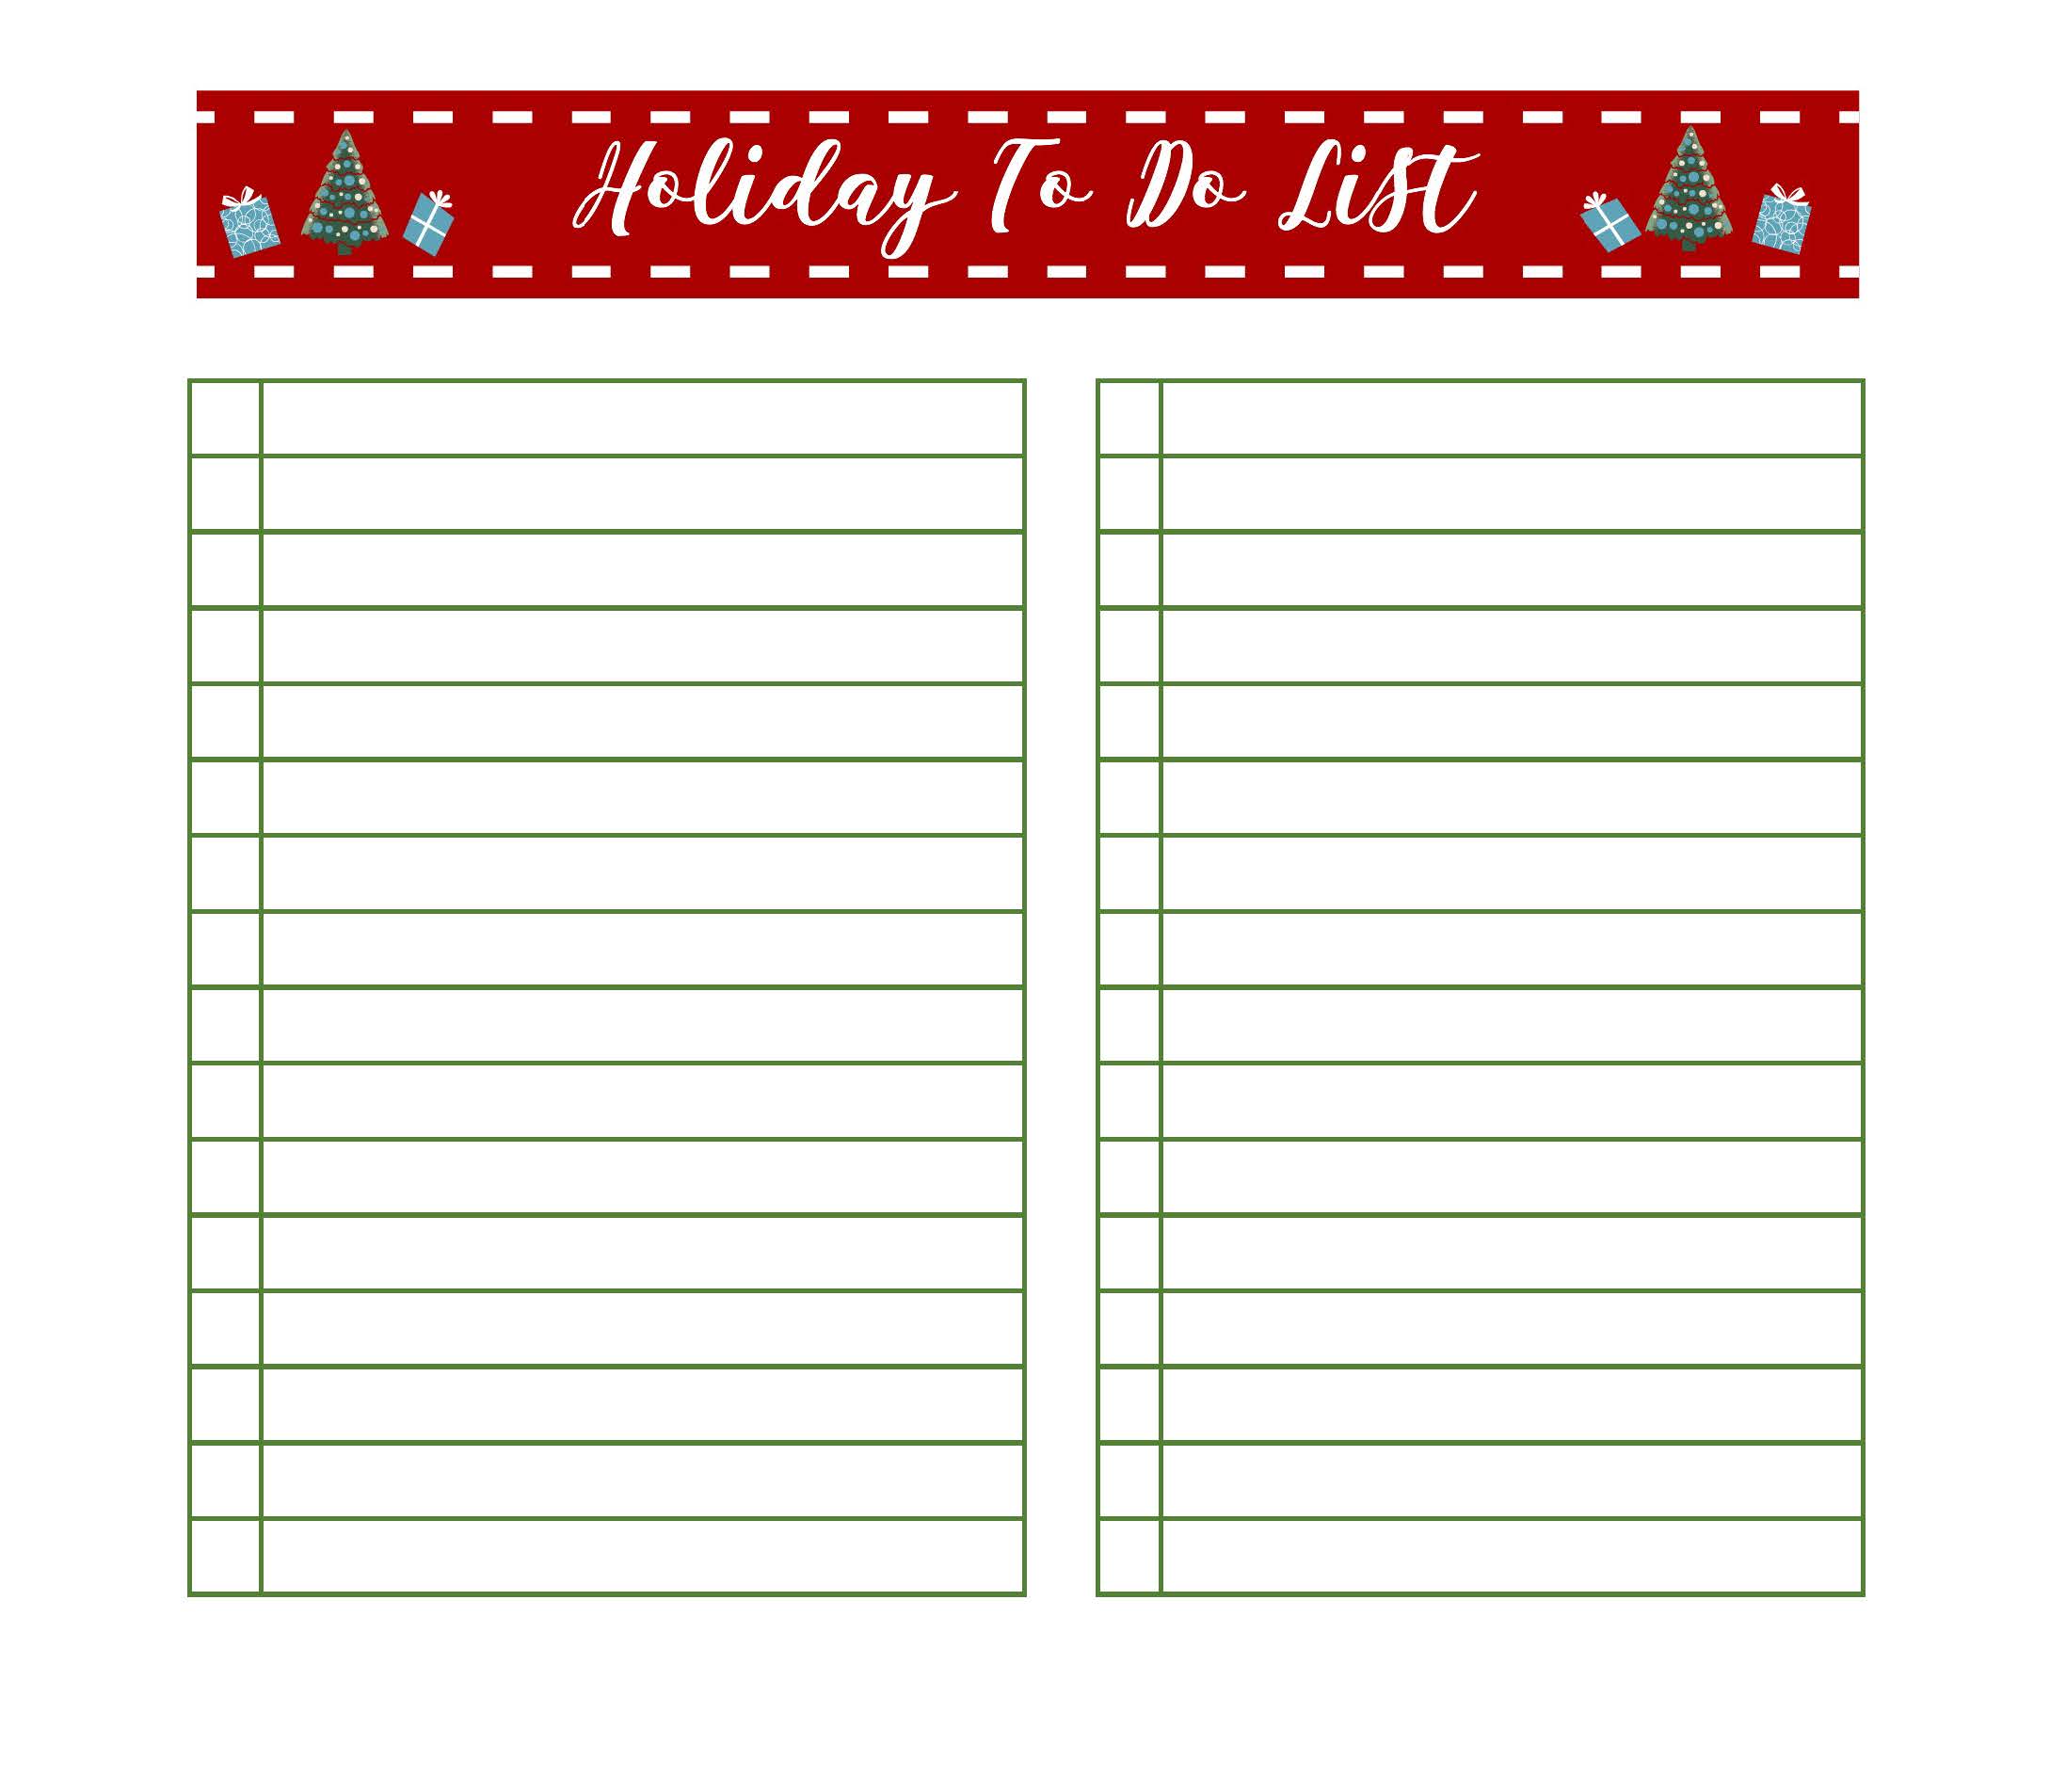 Get Organized for Christmas with Free Printable Holiday Planners | The